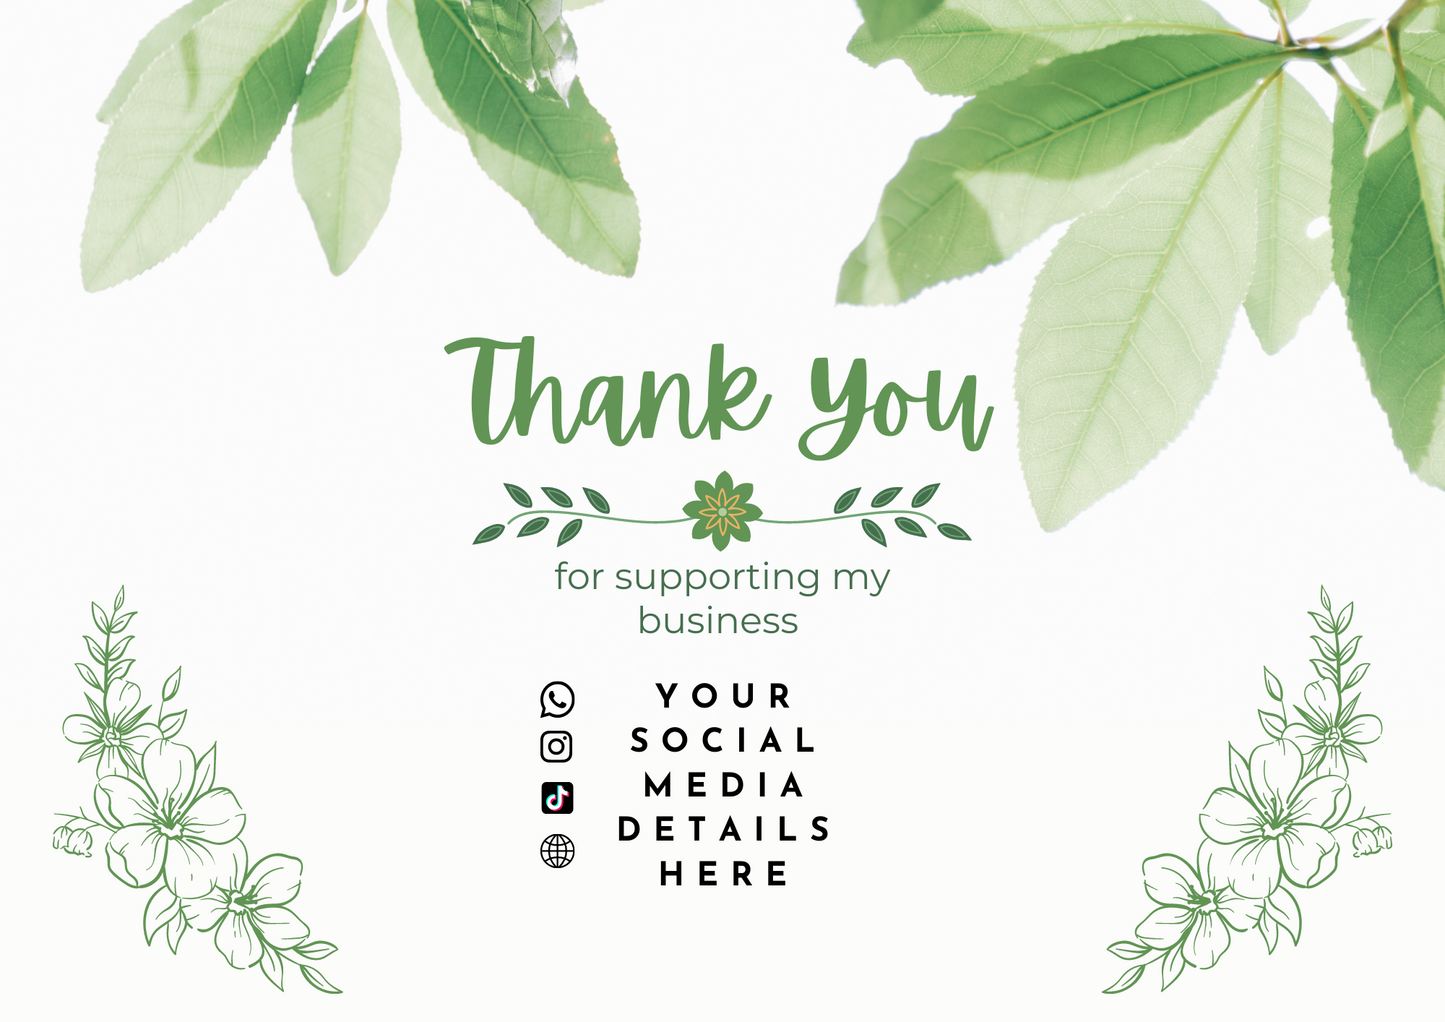 Thank You Cards- Planty (Personalised) Pack of 50 or 100